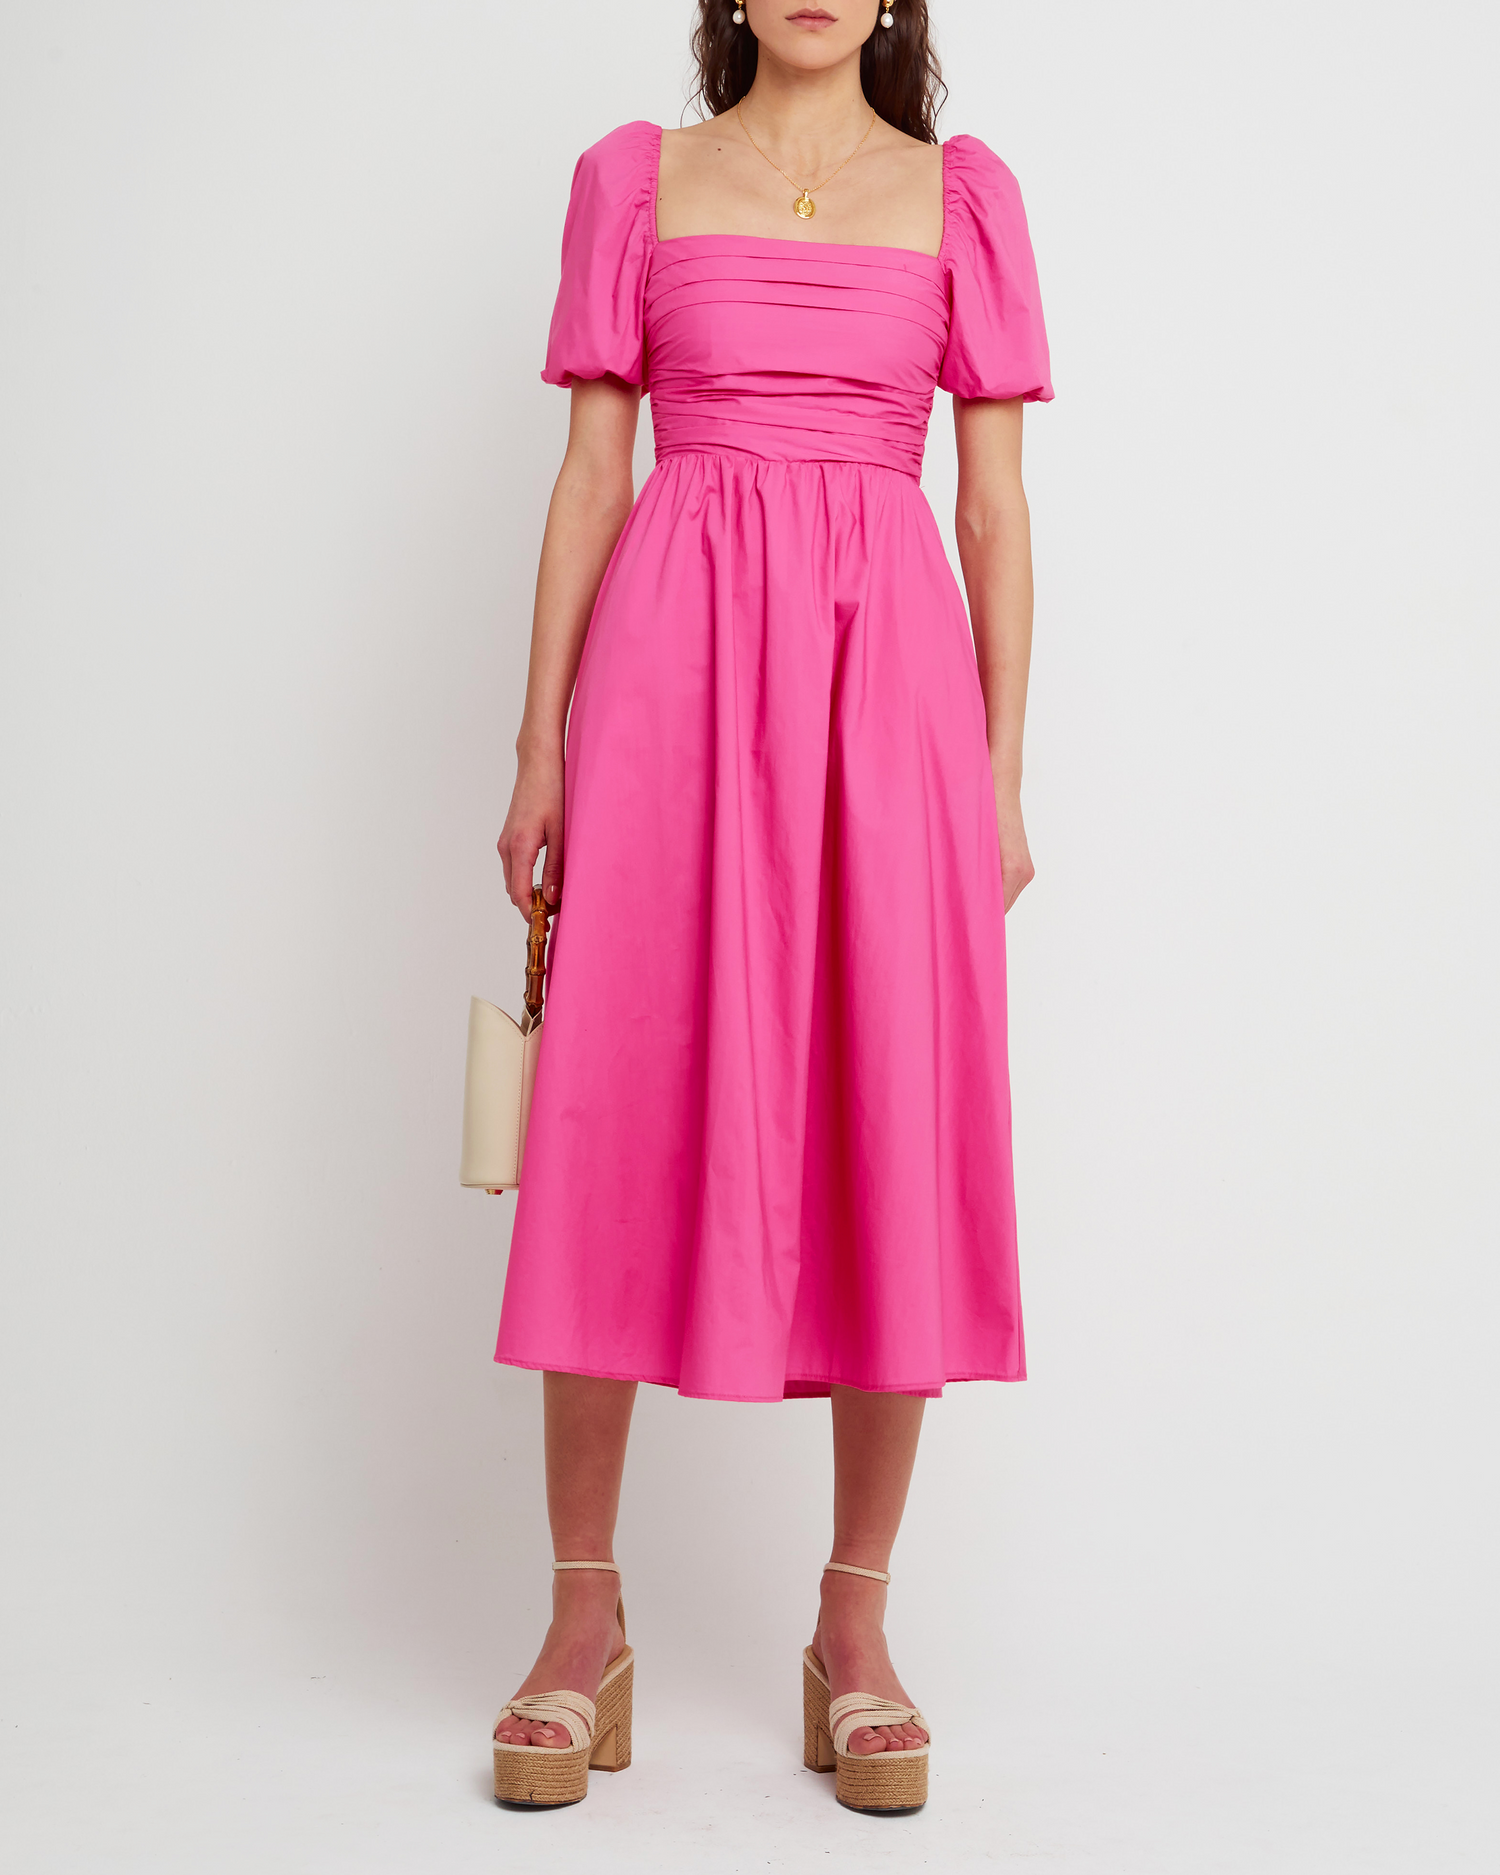 First image of River Dress, a pink midi dress, square neckline, short puff sleeves, gathered bodice